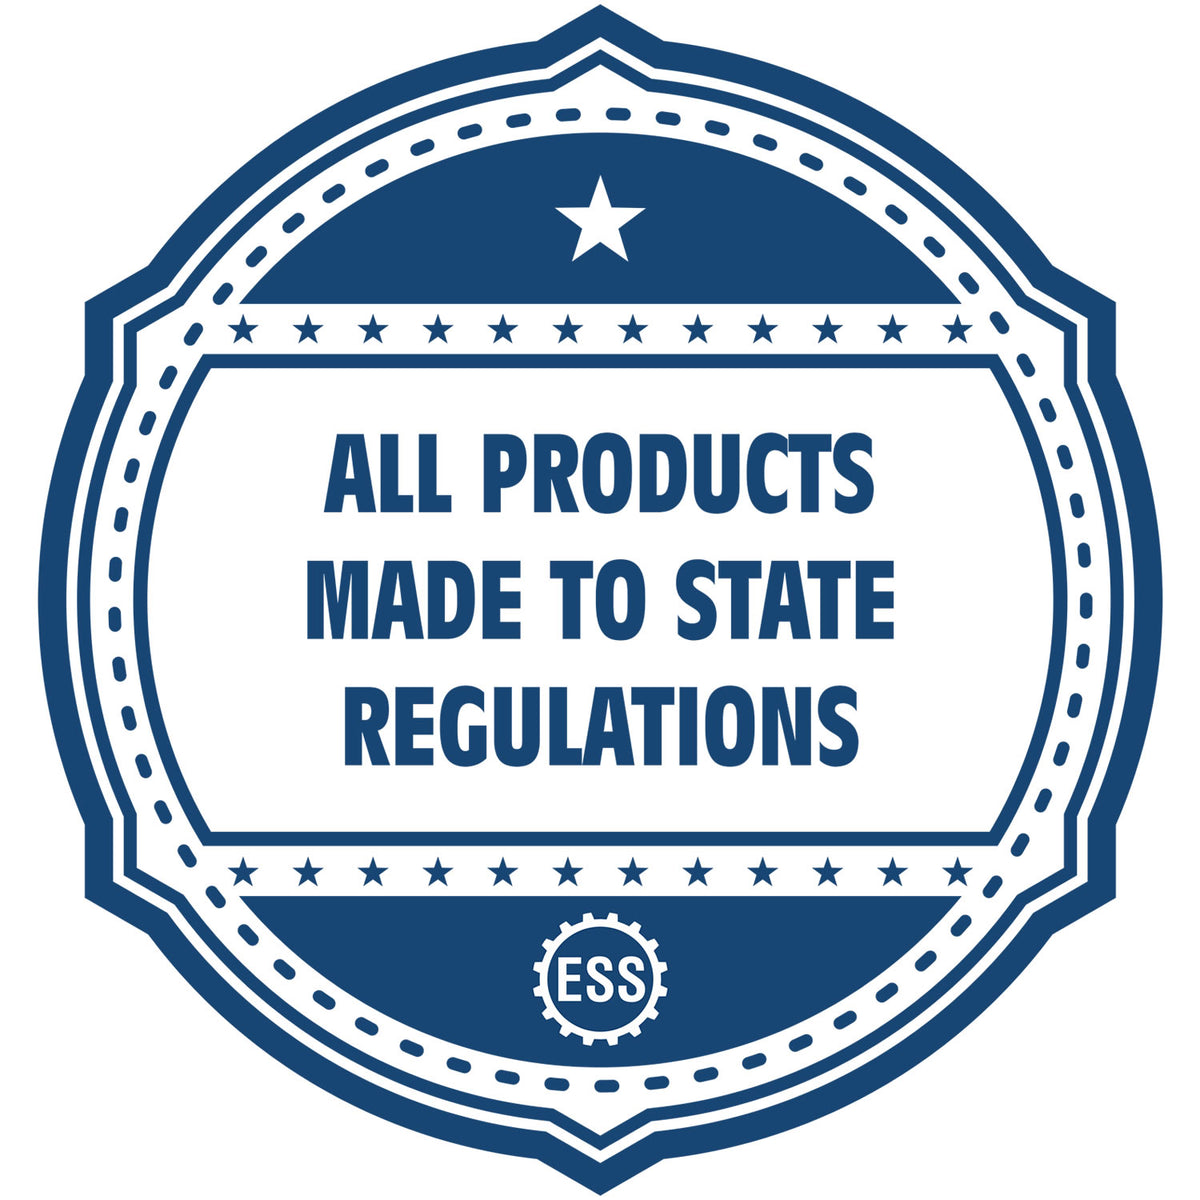 An icon or badge element for the Handheld Florida Professional Engineer Embosser showing that this product is made in compliance with state regulations.